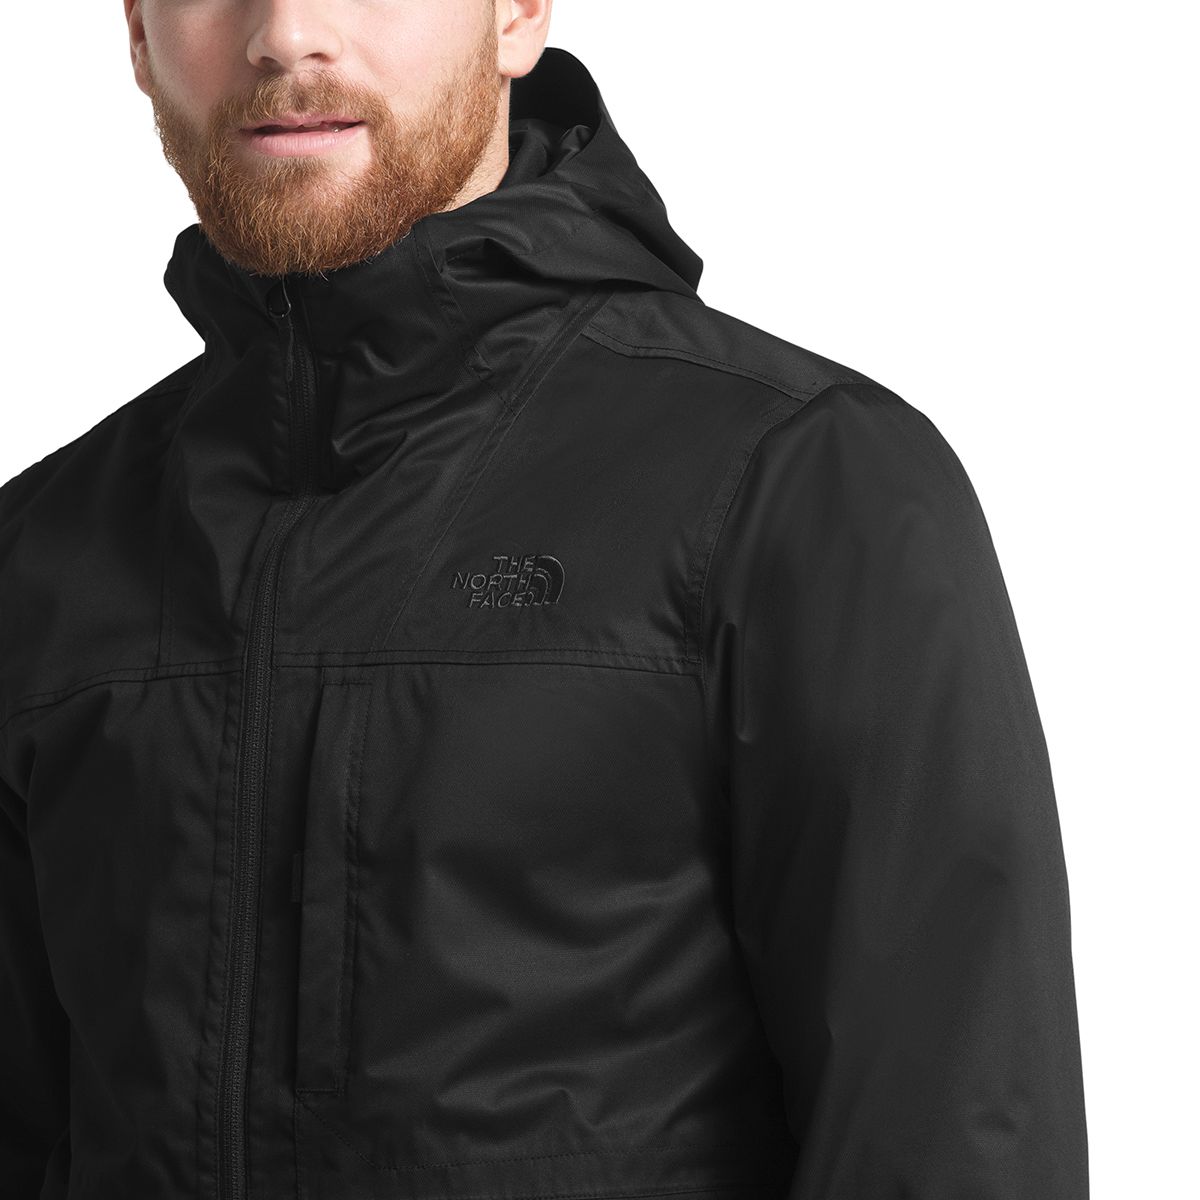 north face men's arrowood triclimate jacket